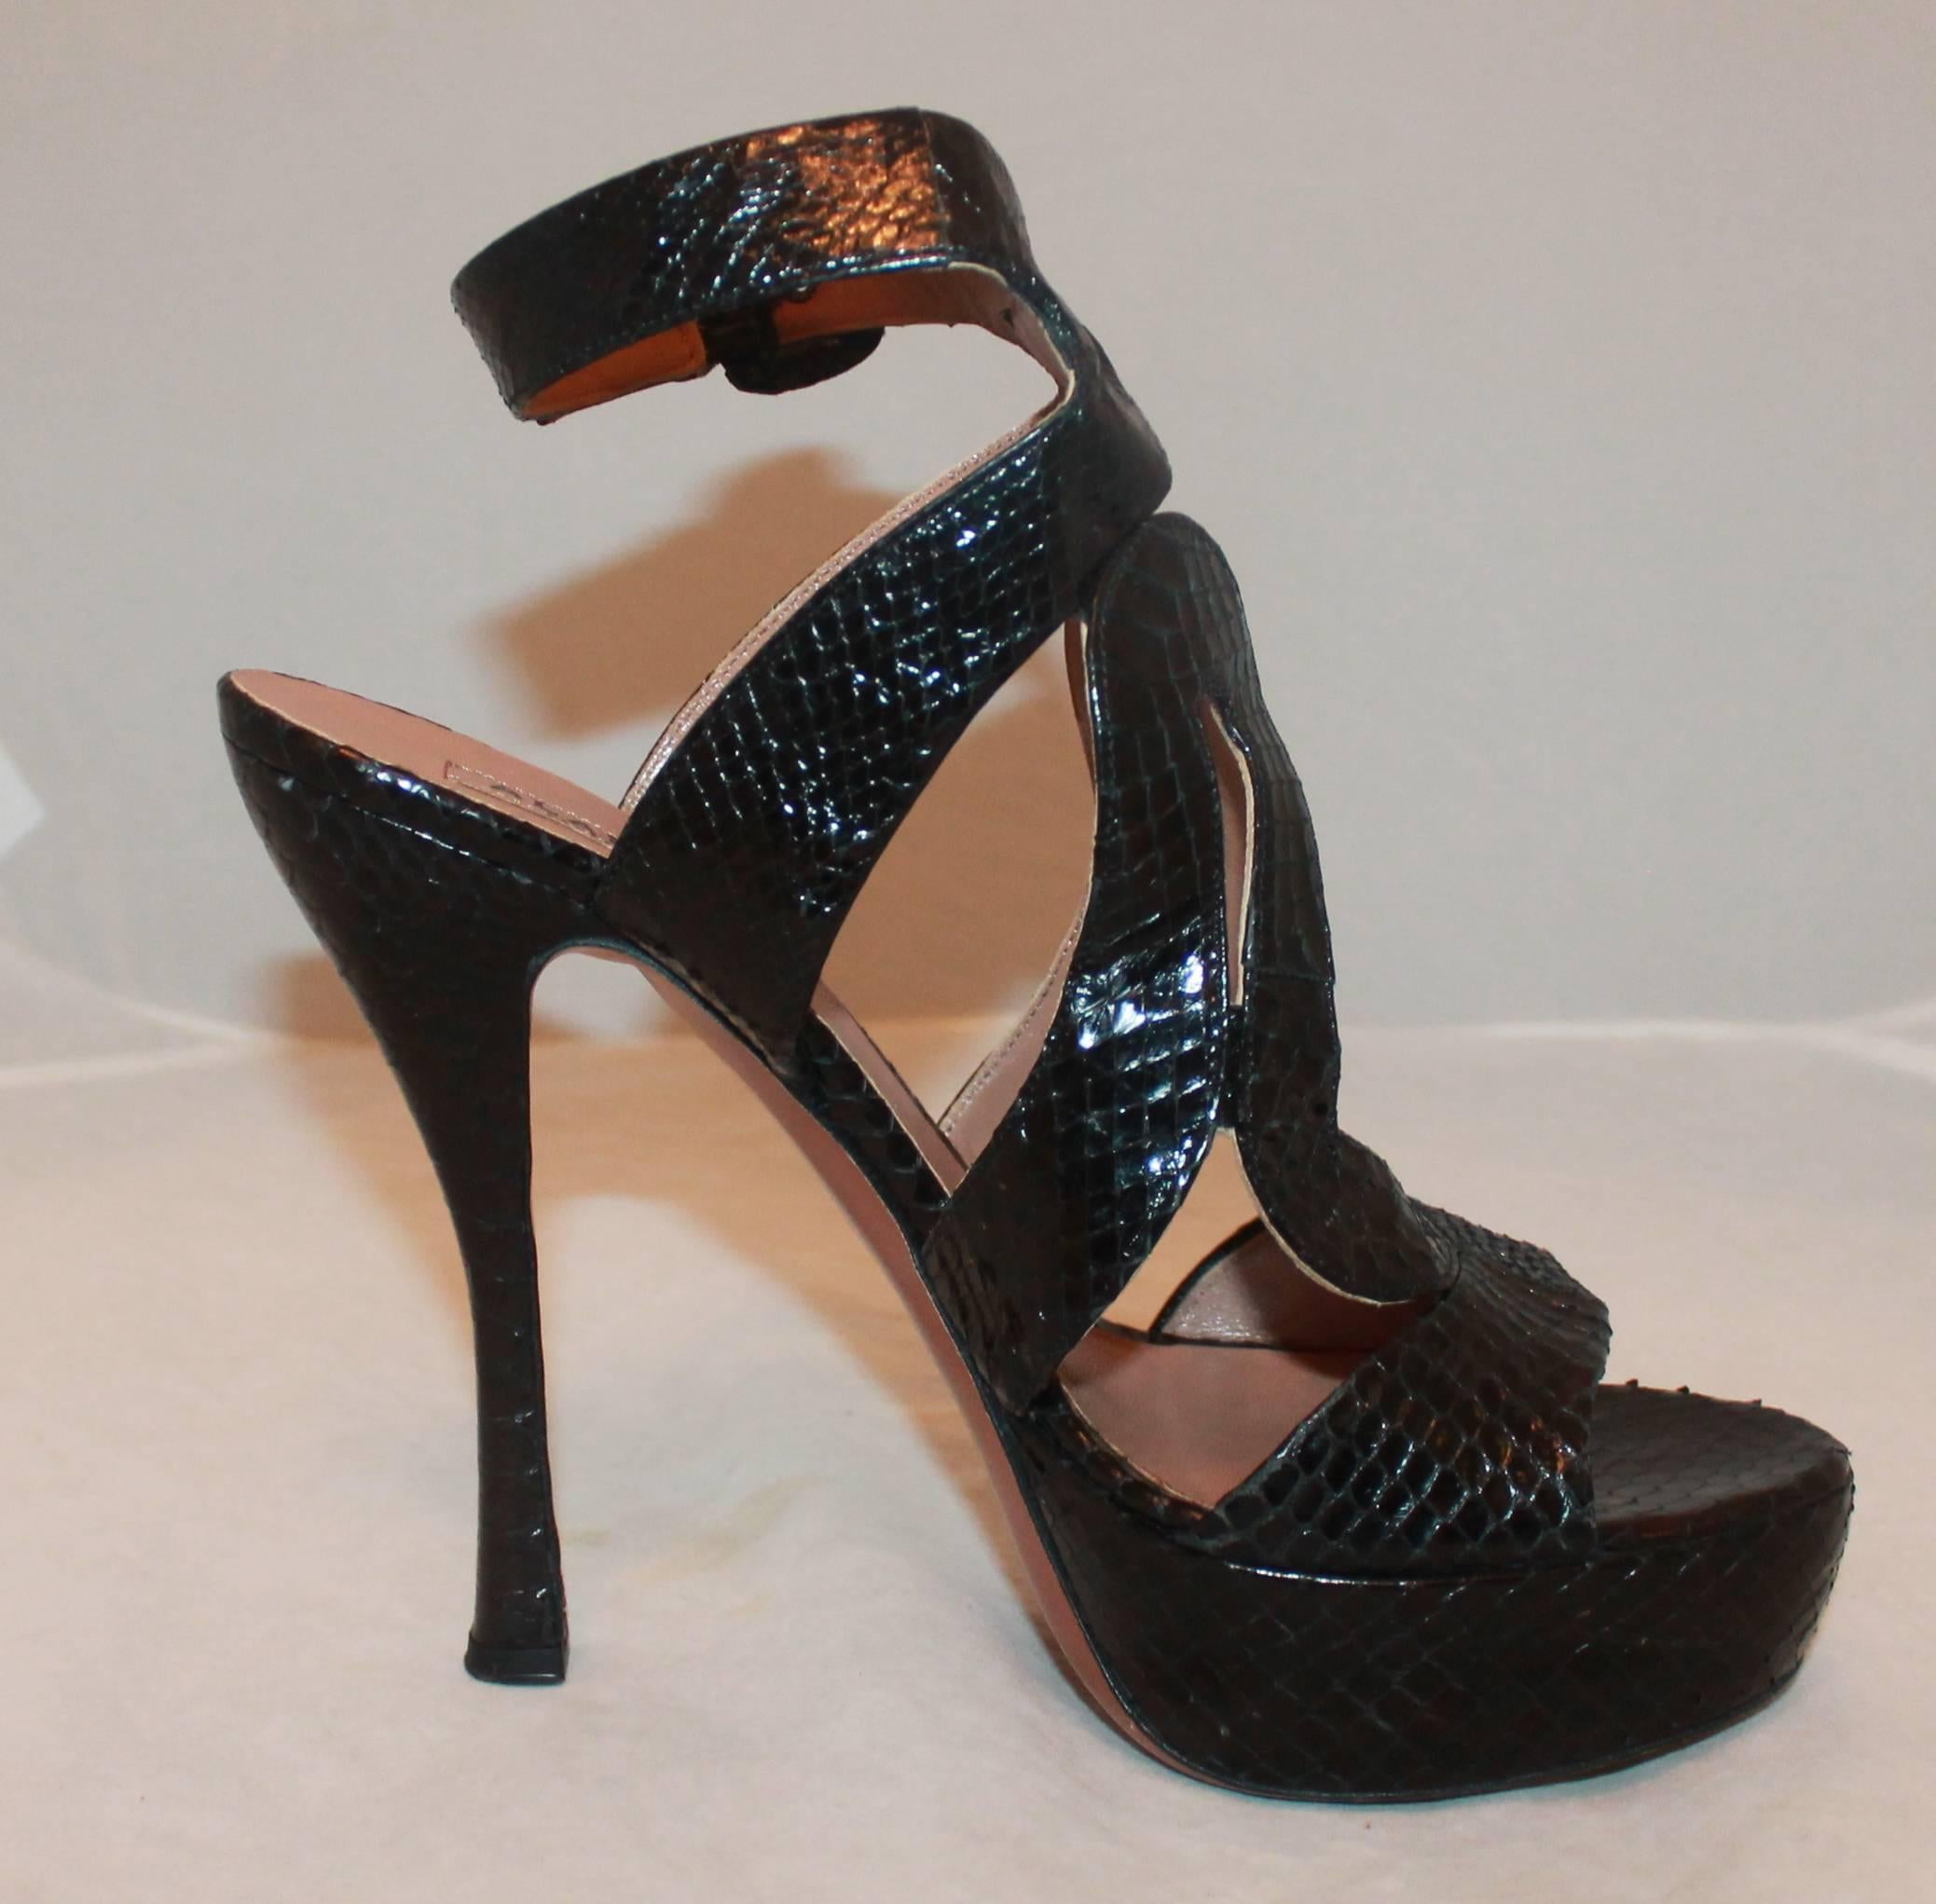 Alaia Black Plaform Cutout Snakeskin Heel - 40

These Alaia heels are in very good condition with noticeable wear on bottom. These are snakeskin cutout platform heels with an ankle strap. 

Measurements:

Heel - 5.25